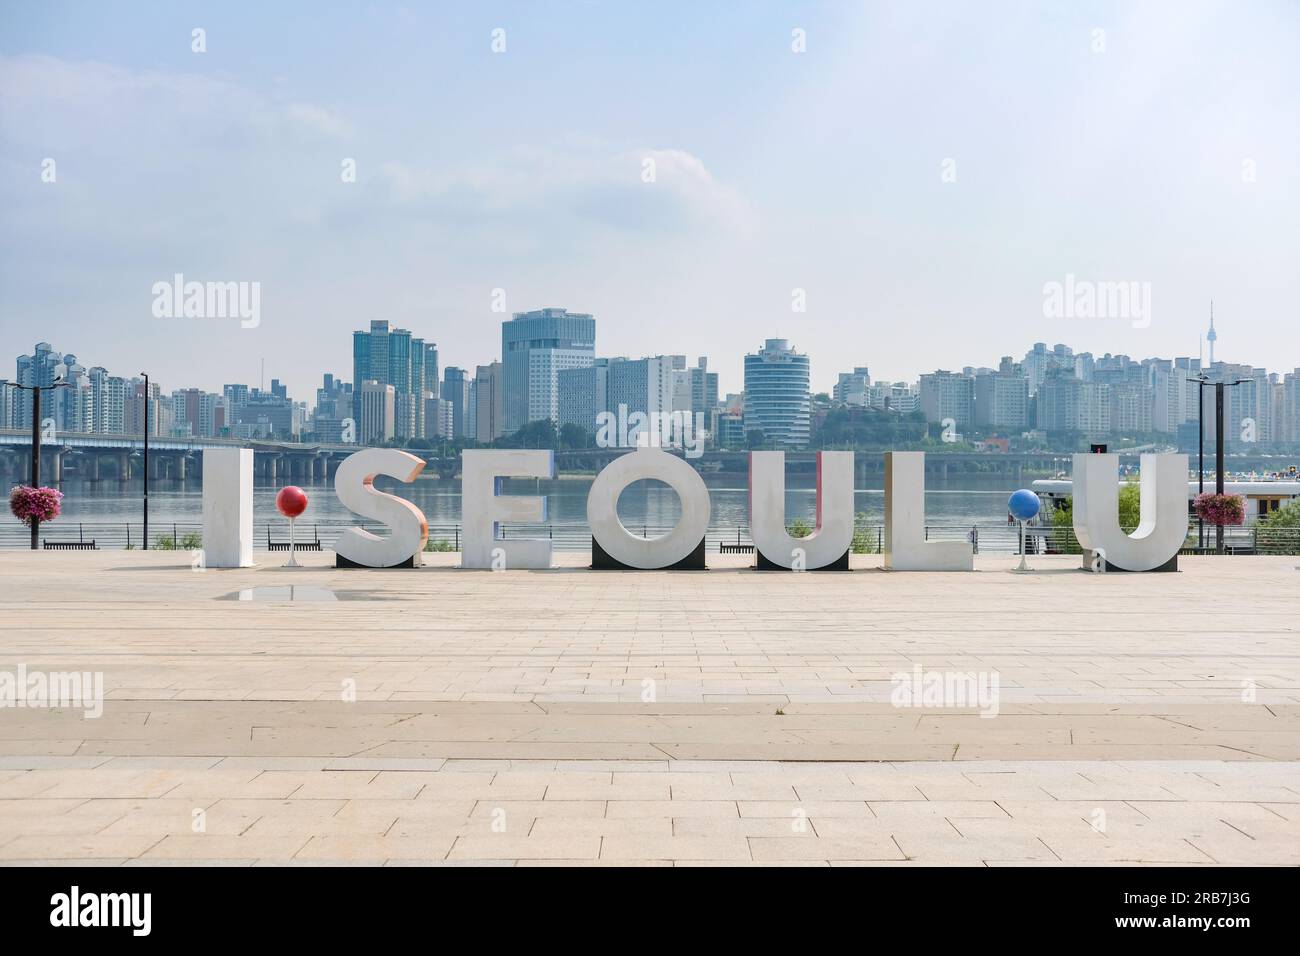 Seoul, South Korea - 11 July 2022: I Seoul U signage at Yeouido Hangang Park, one of the parks next to Han river Stock Photo